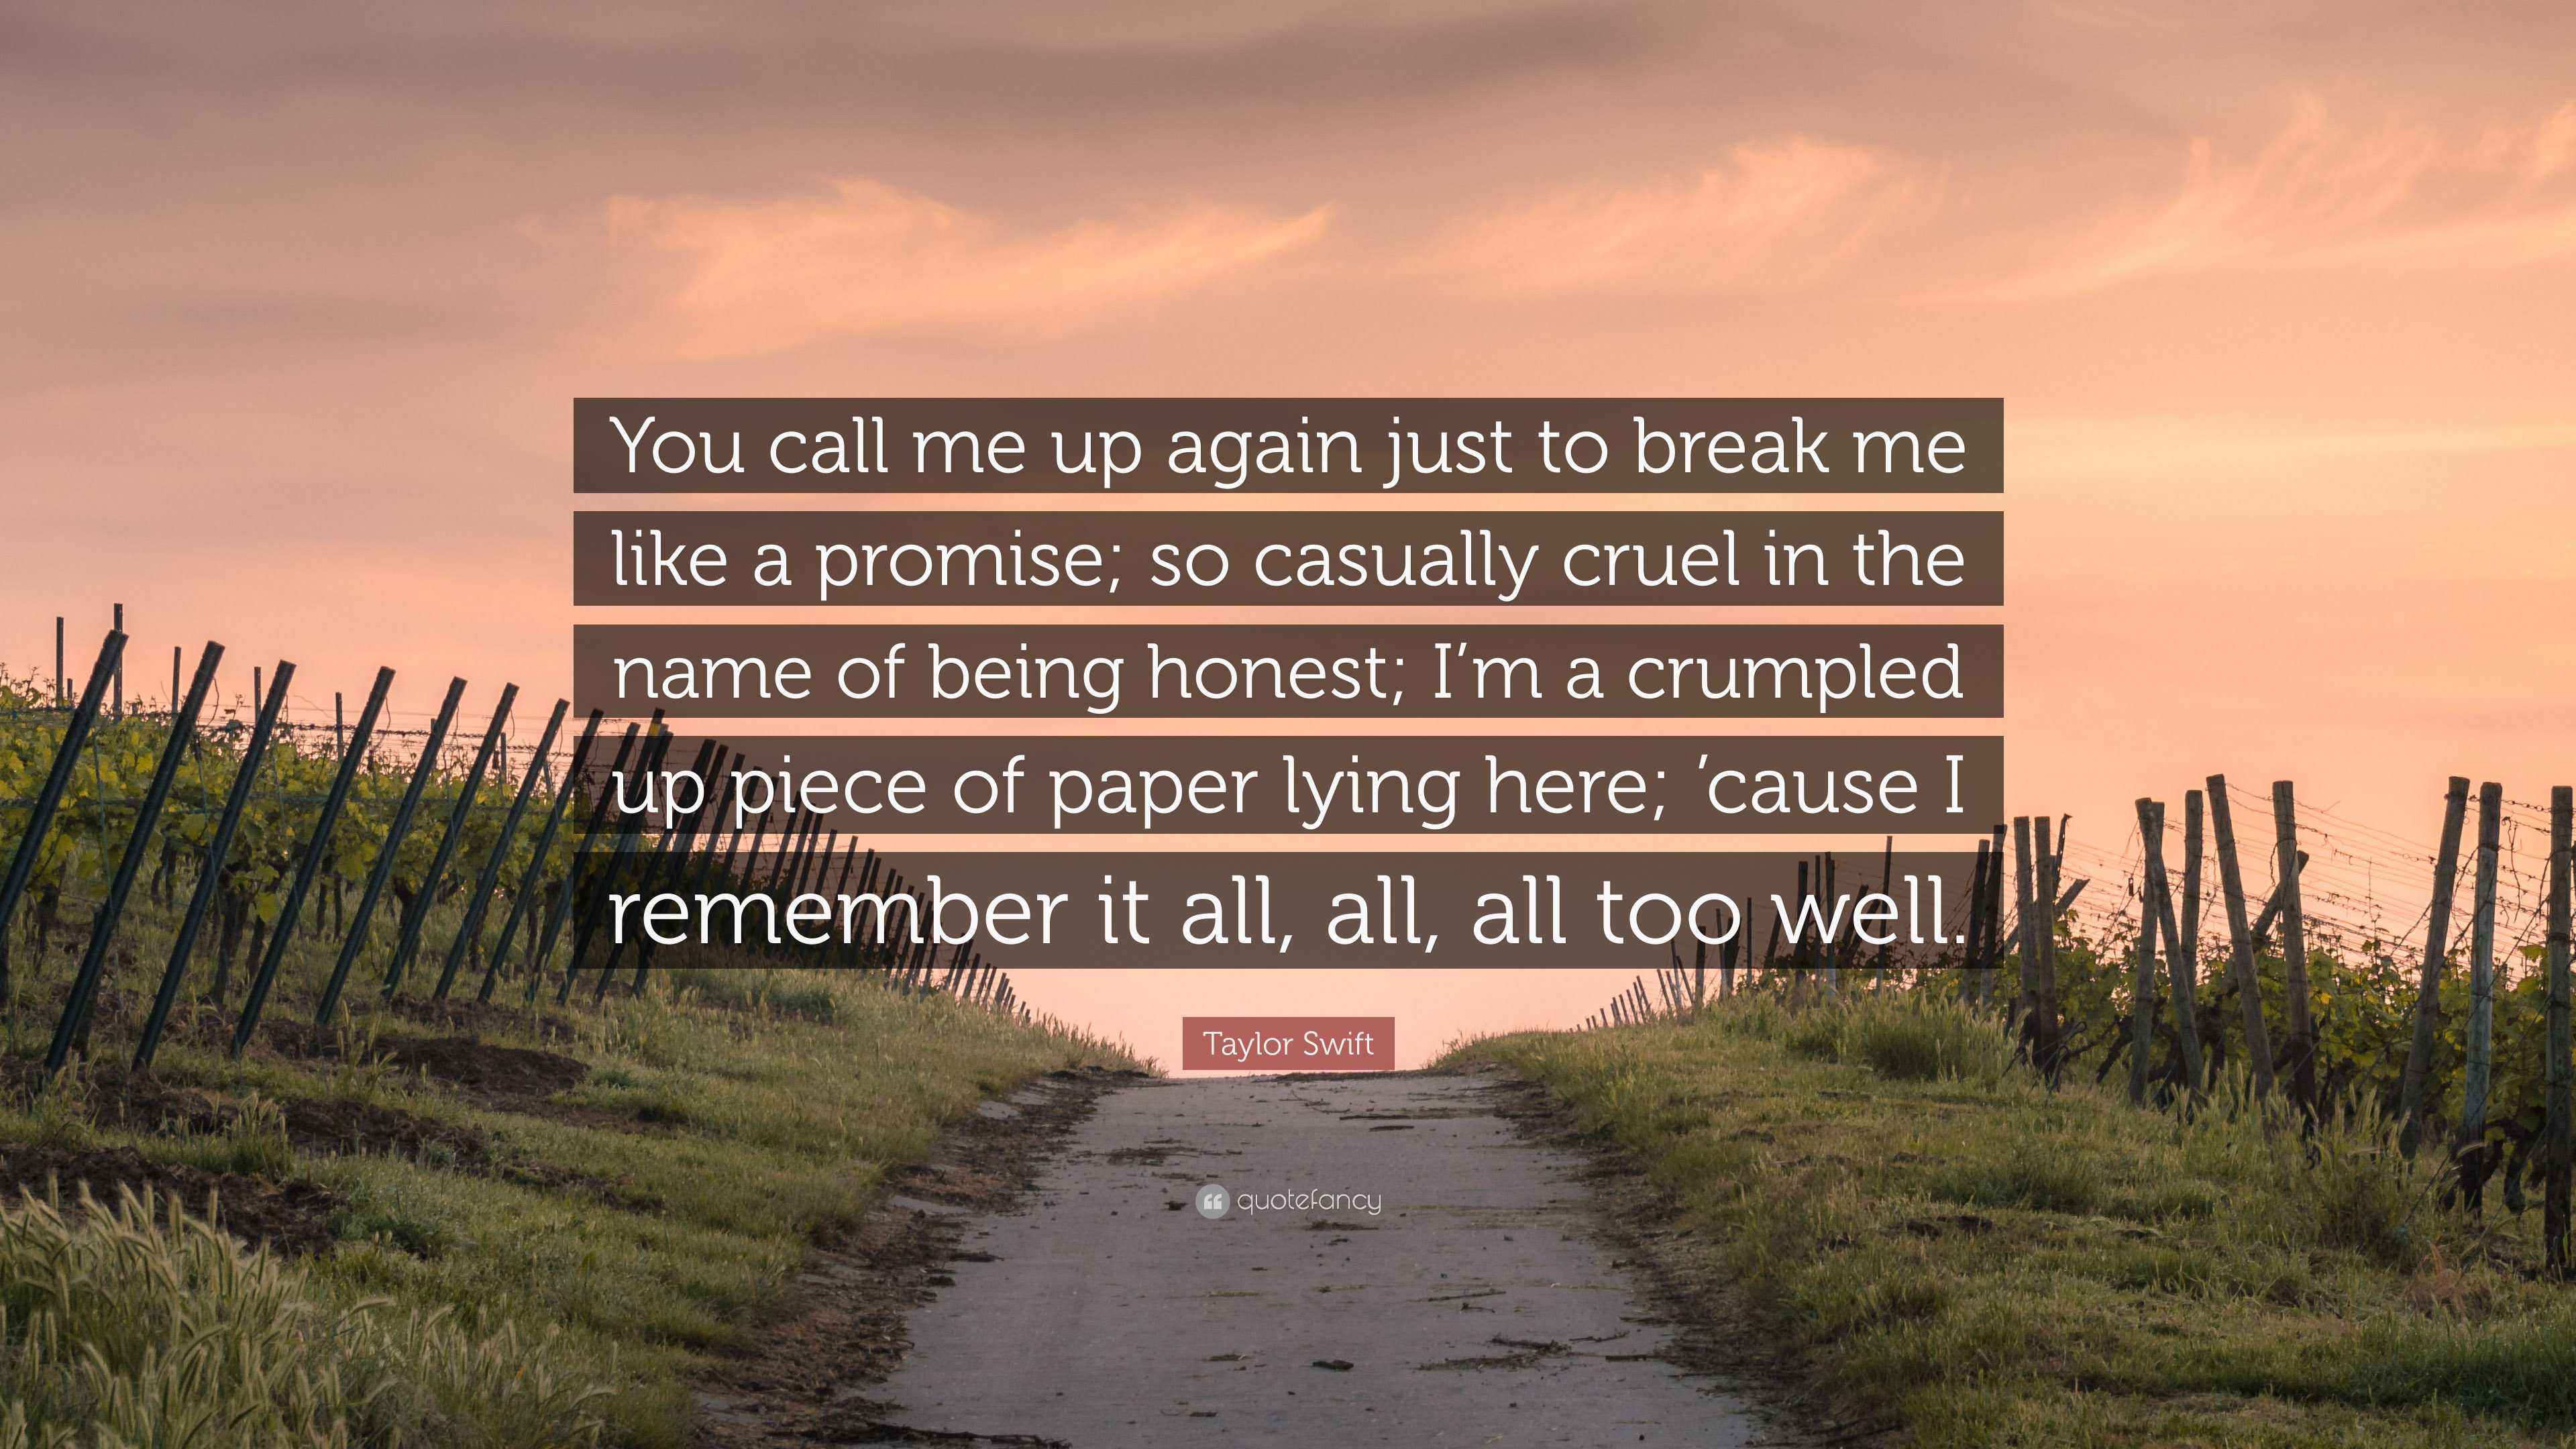 Taylor Swift Quote: “You call me up again just to break me like a promise;  so casually cruel in the name of being honest; I'm a crumpled up p”